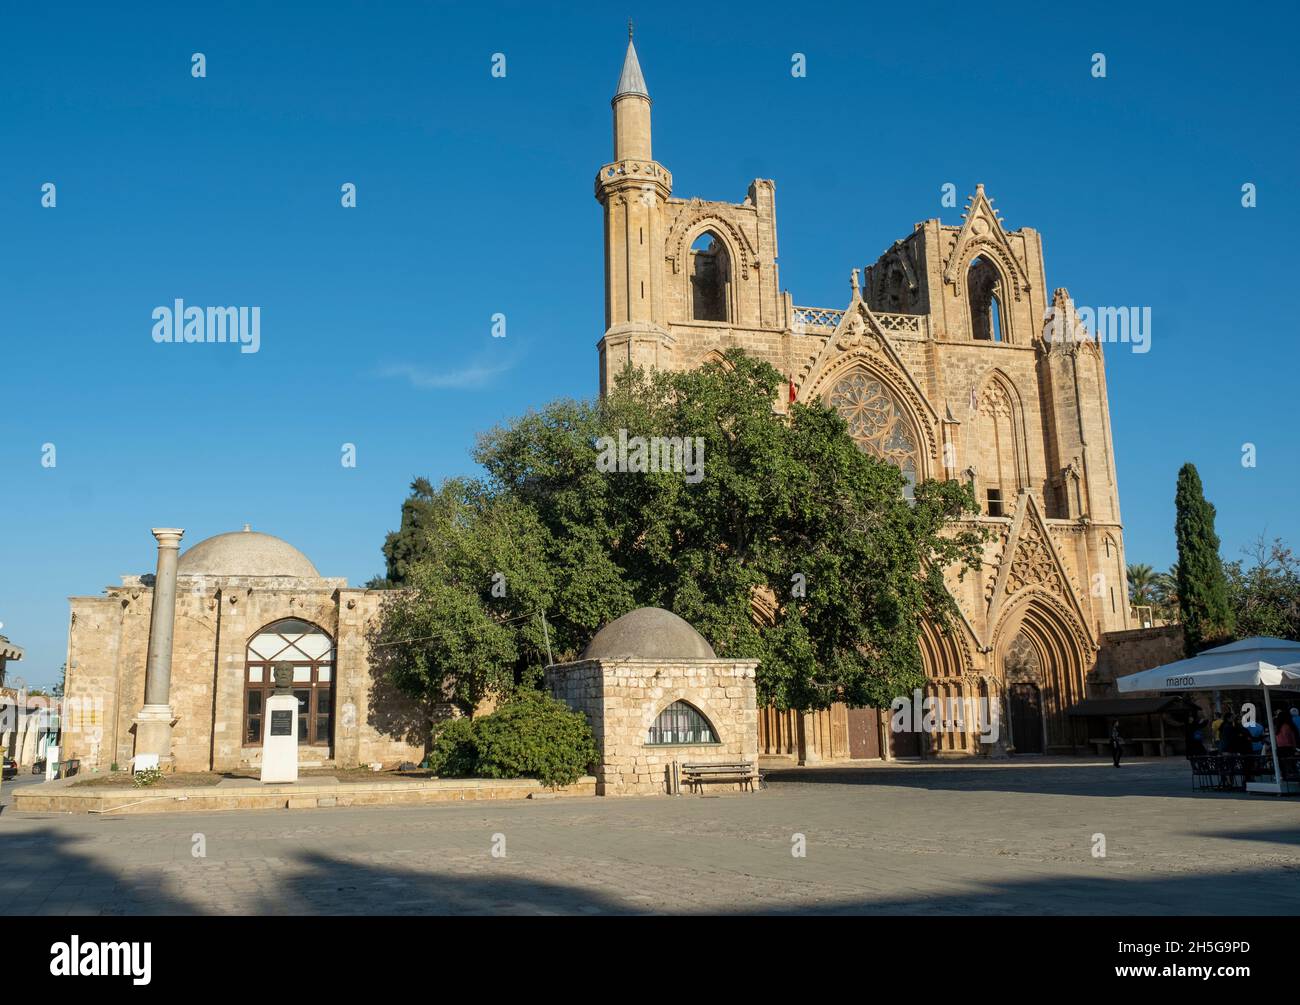 Lala Mustafa Pasha Mosque, originally known as the Cathedral of Saint Nicholas which is situated in Namik Kemal Square, Famagusta, Northern Cyprus. Stock Photo